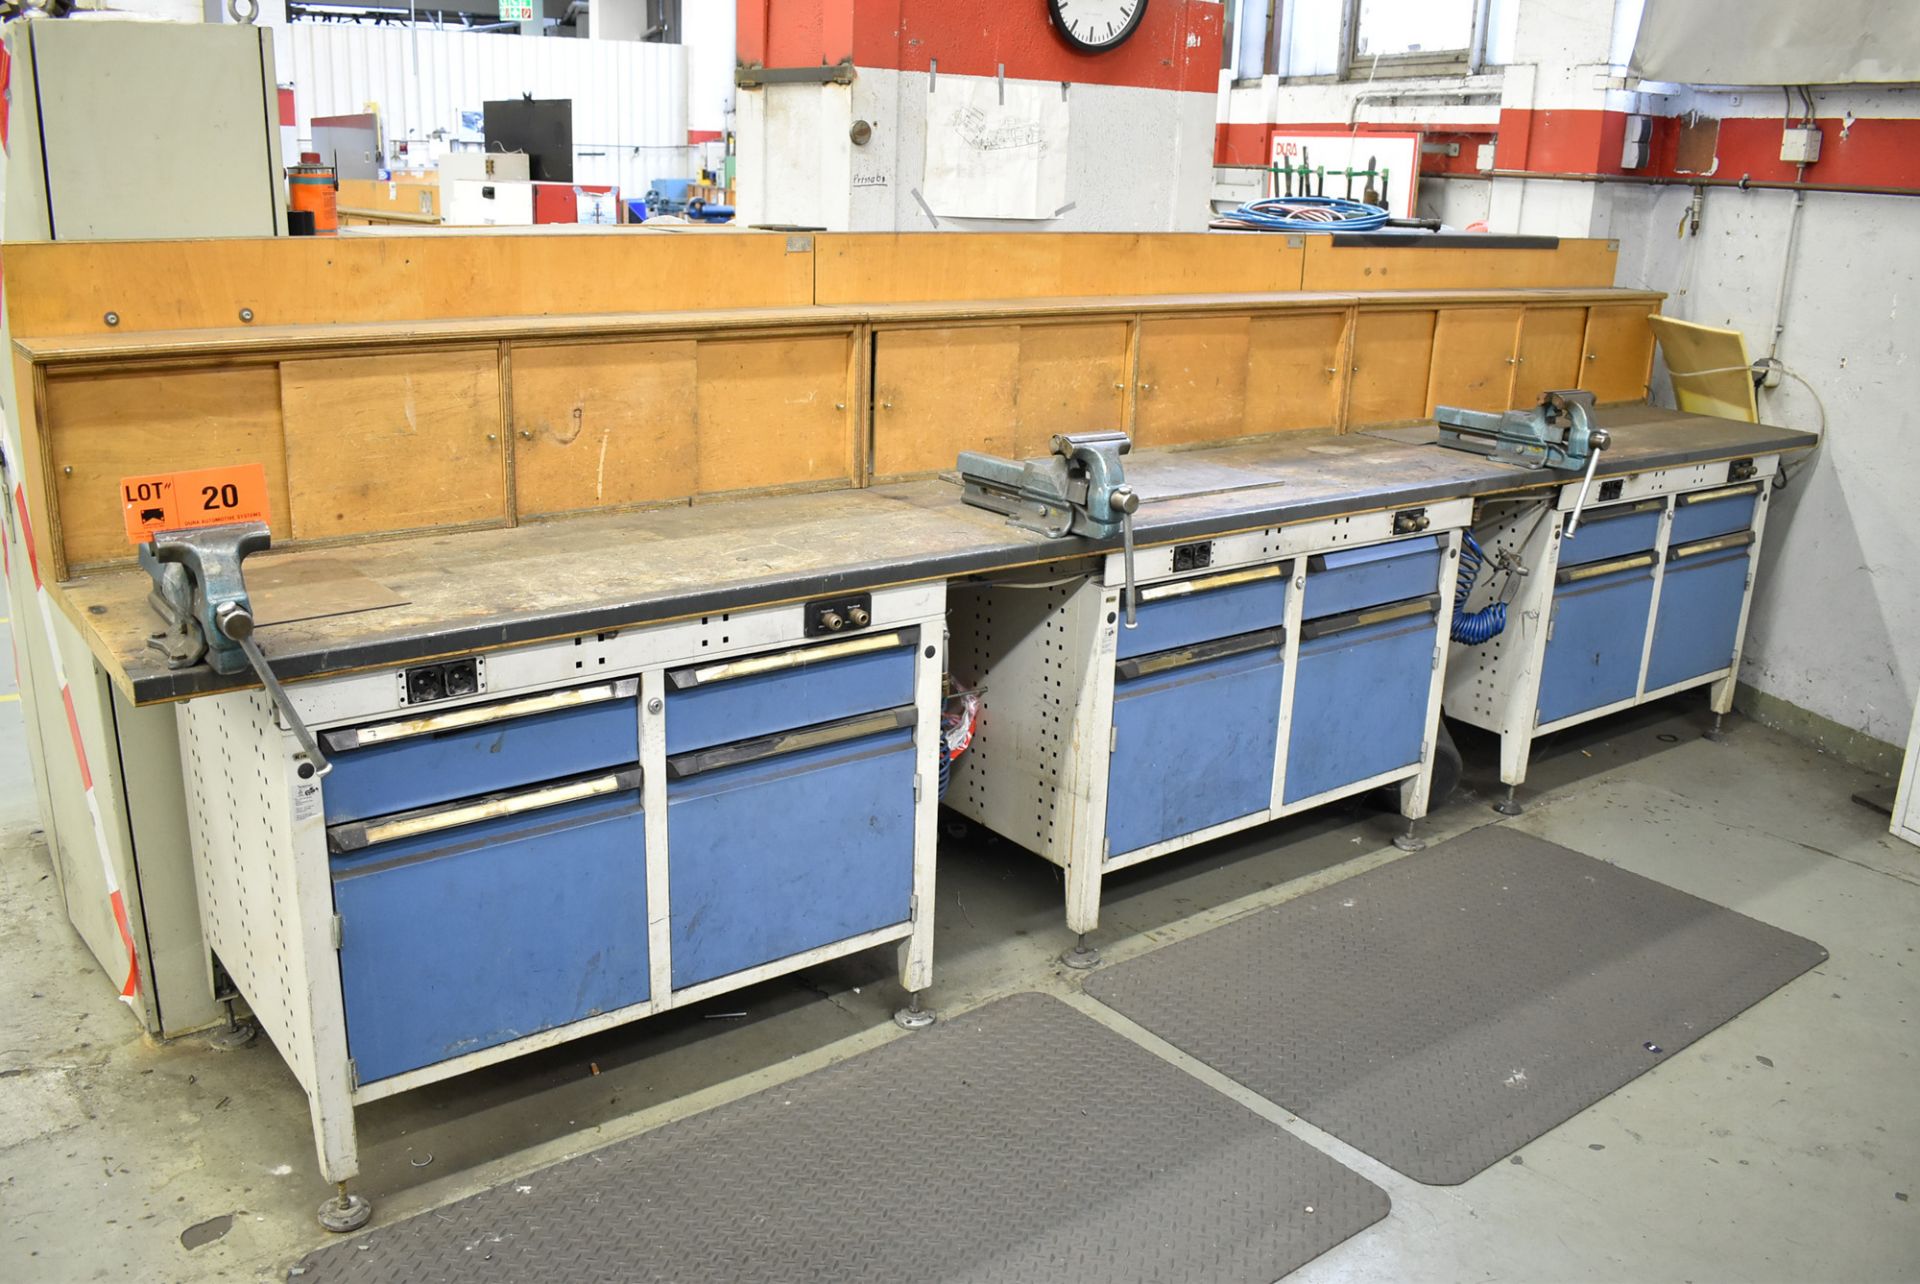 LOT/ (3) KIND WOOD TOP WORK BENCHES WITH 140MM VISES, POWER AND AIR OUTLETS (BAU 9) [Removal Fee = €